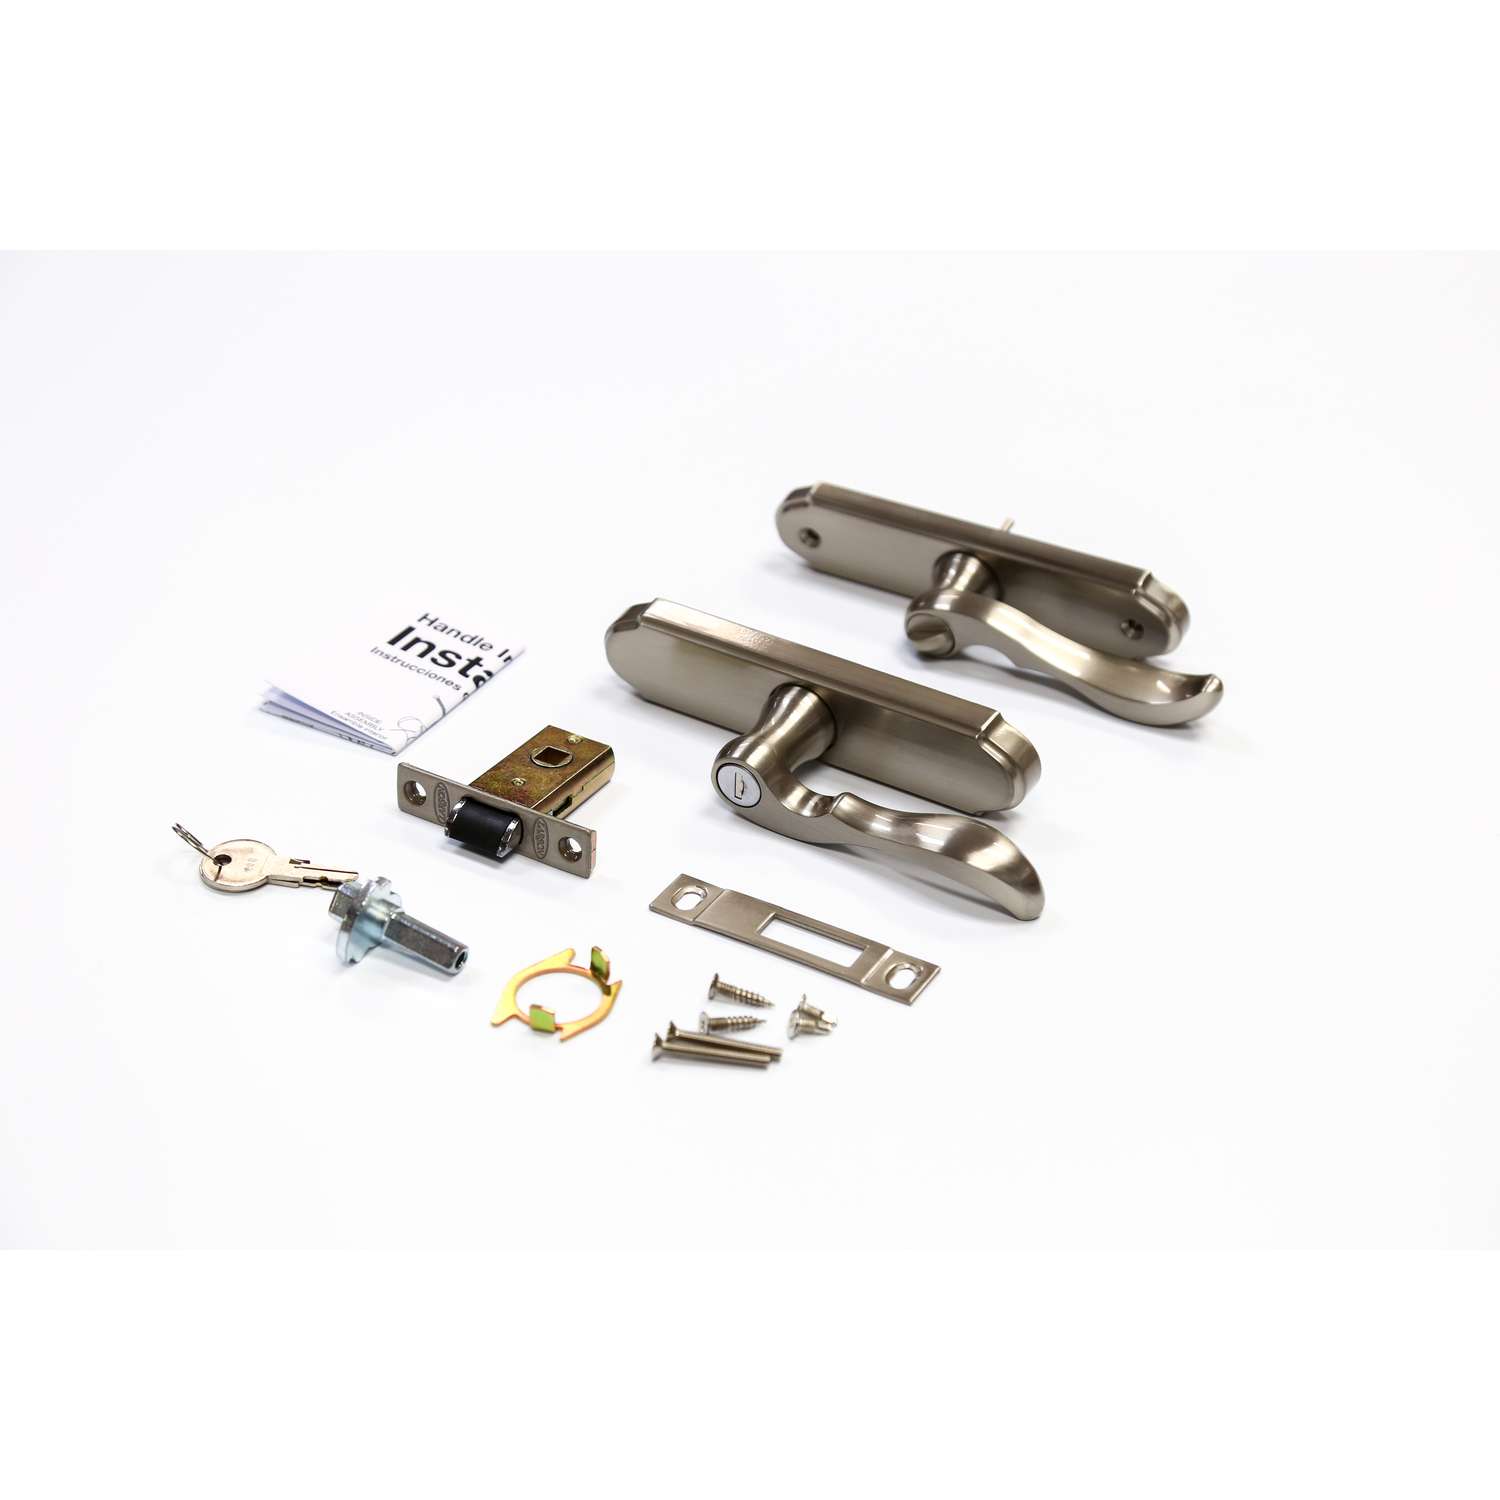 Cabinet Latches and Locks - Ace Hardware